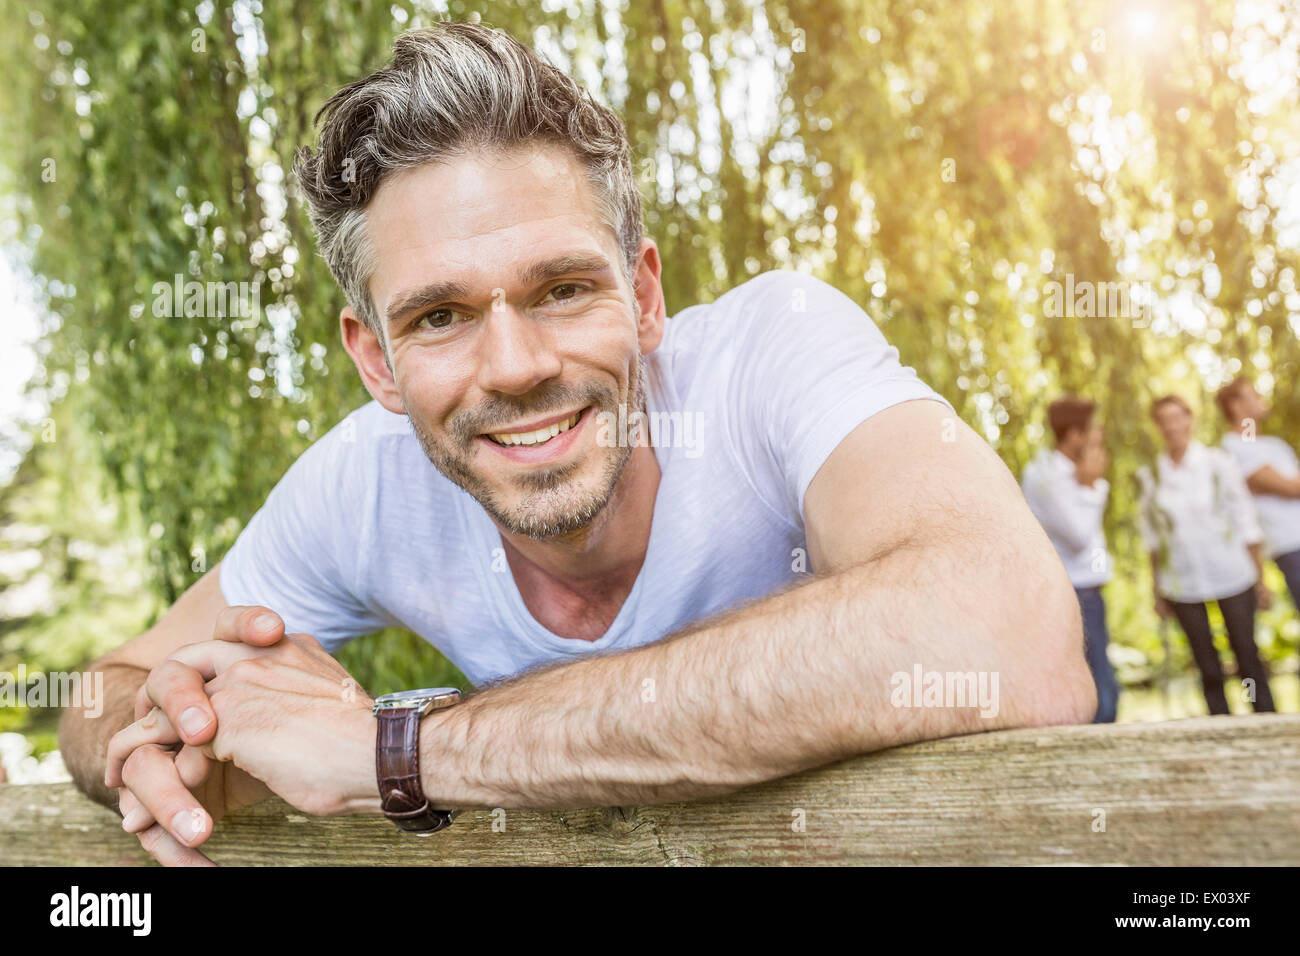 Portrait of mid adult man leaning on fence in forest Banque D'Images